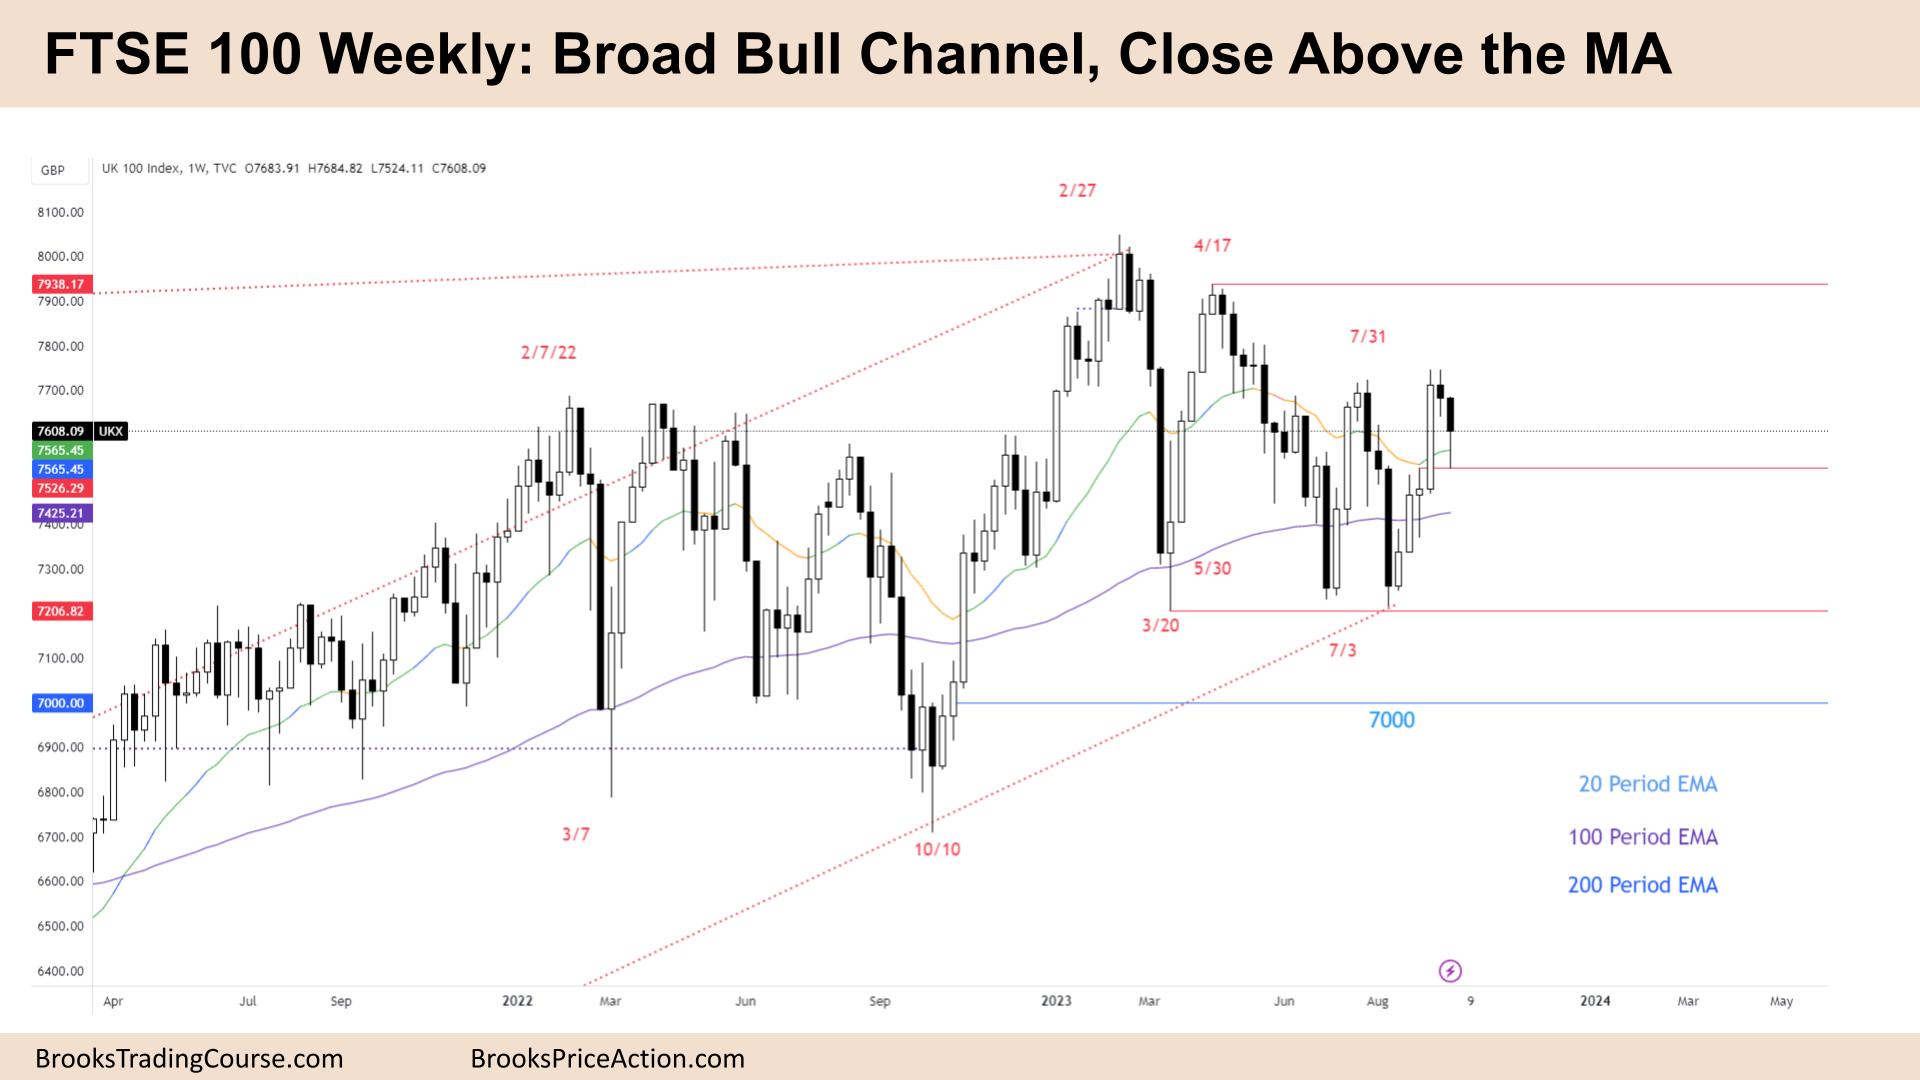 FTSE 100 Broad Bull Channel, Close Above the MA